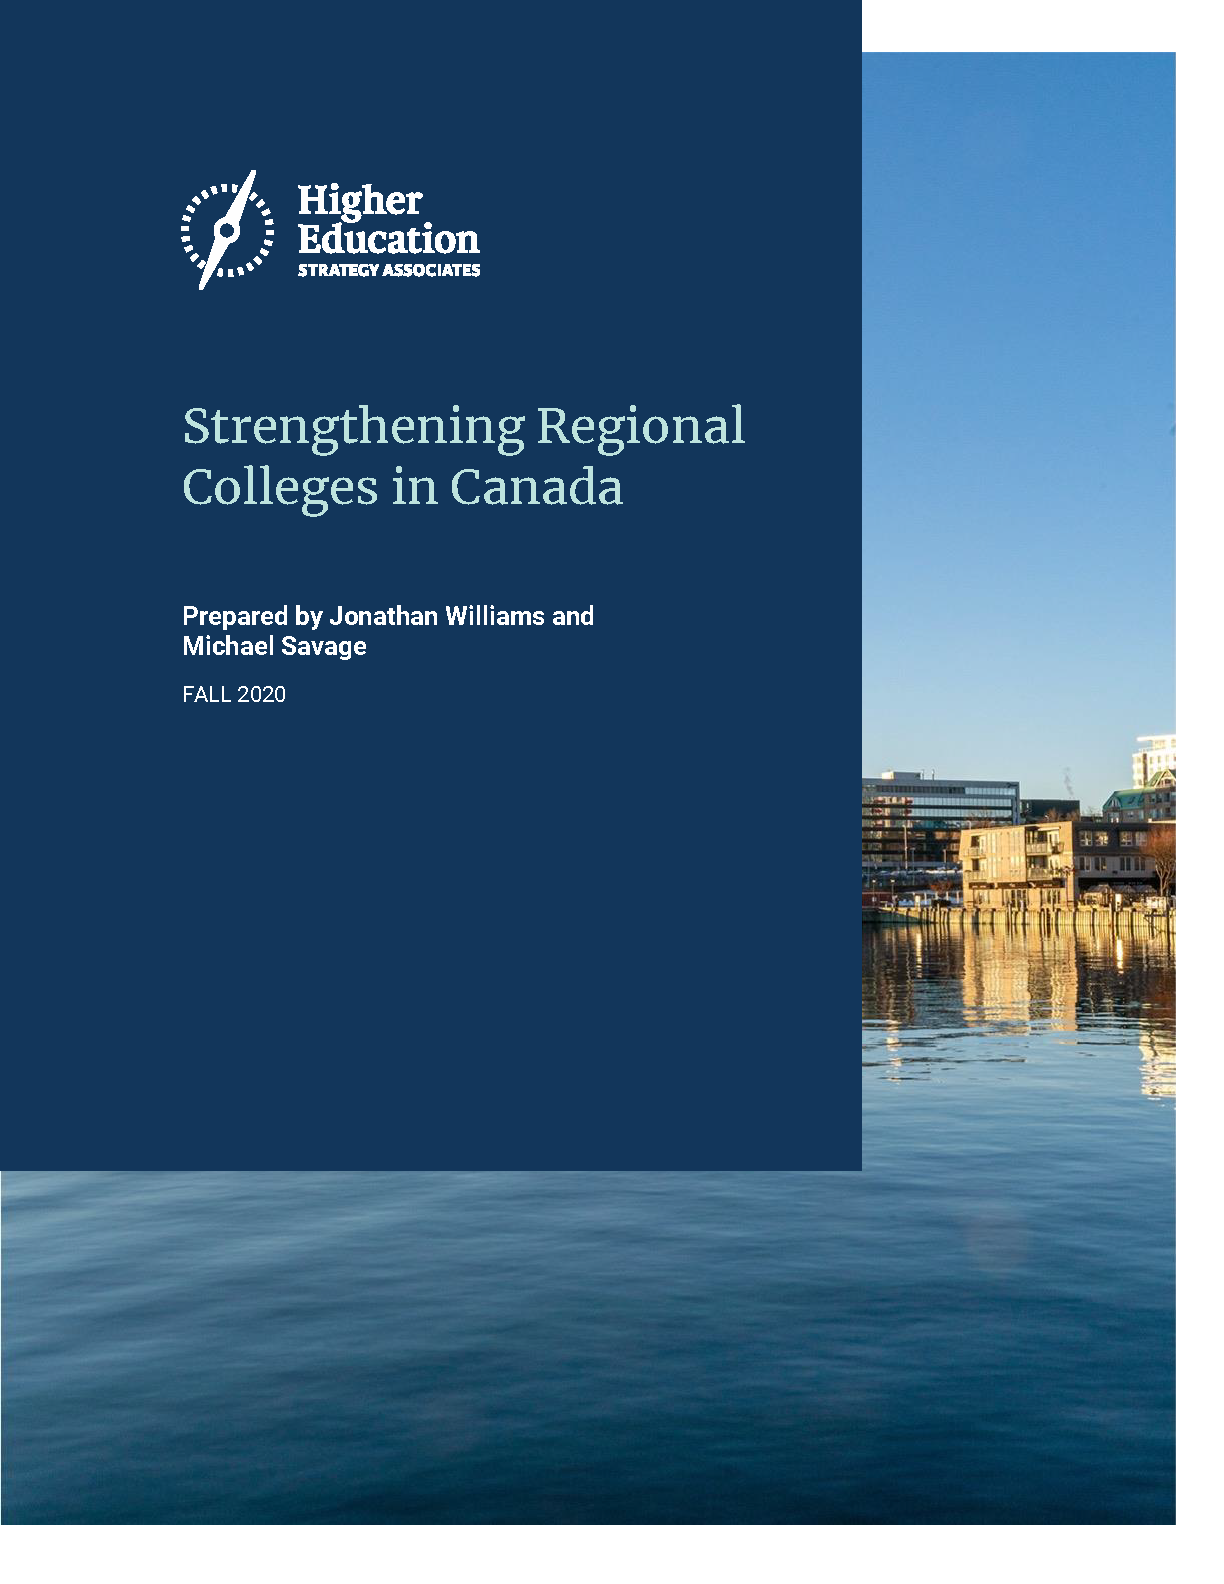 Strengthening Regional Colleges in Canada thumbnail